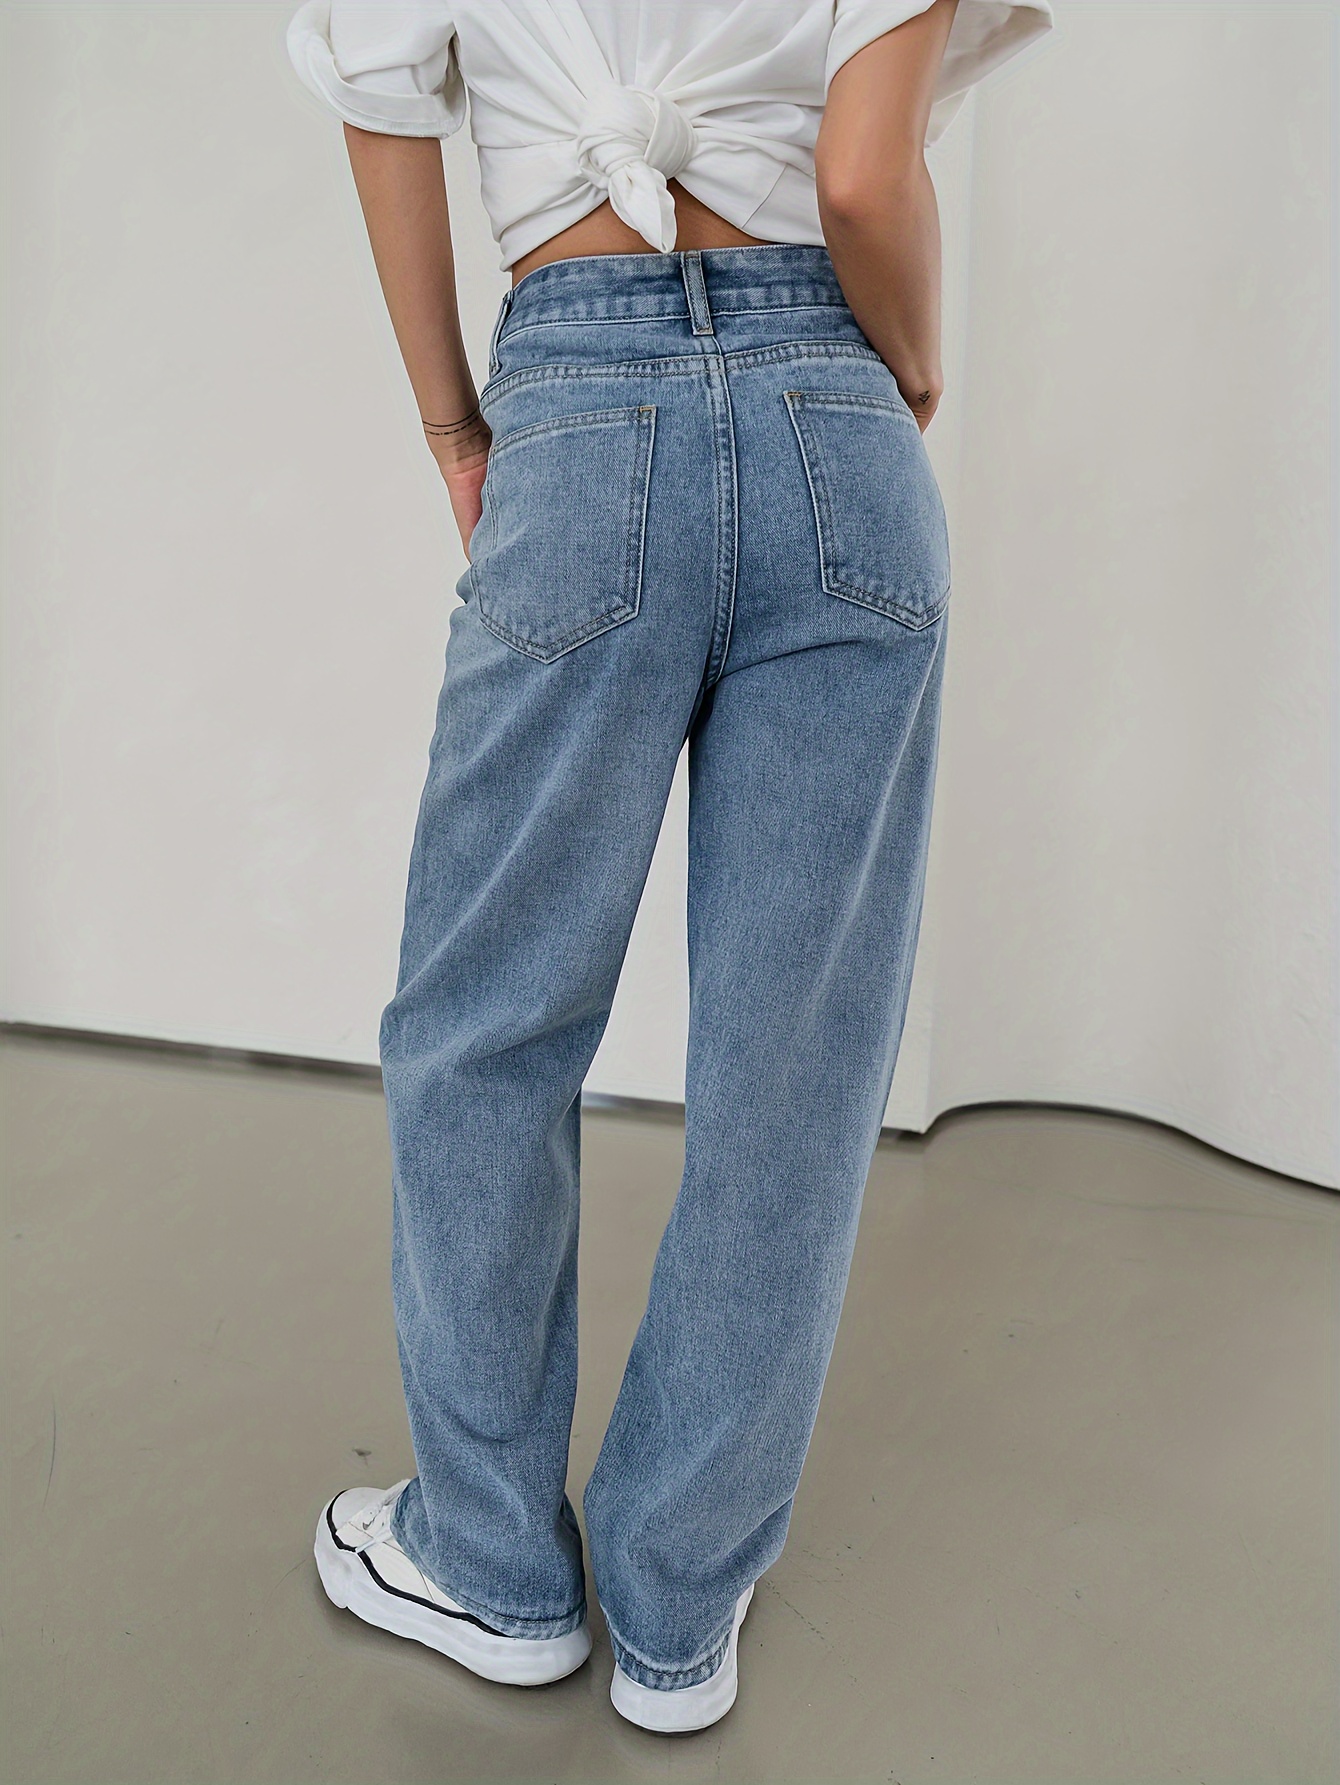 What is the difference between high-rise and high-waist jeans?, by Emmiol